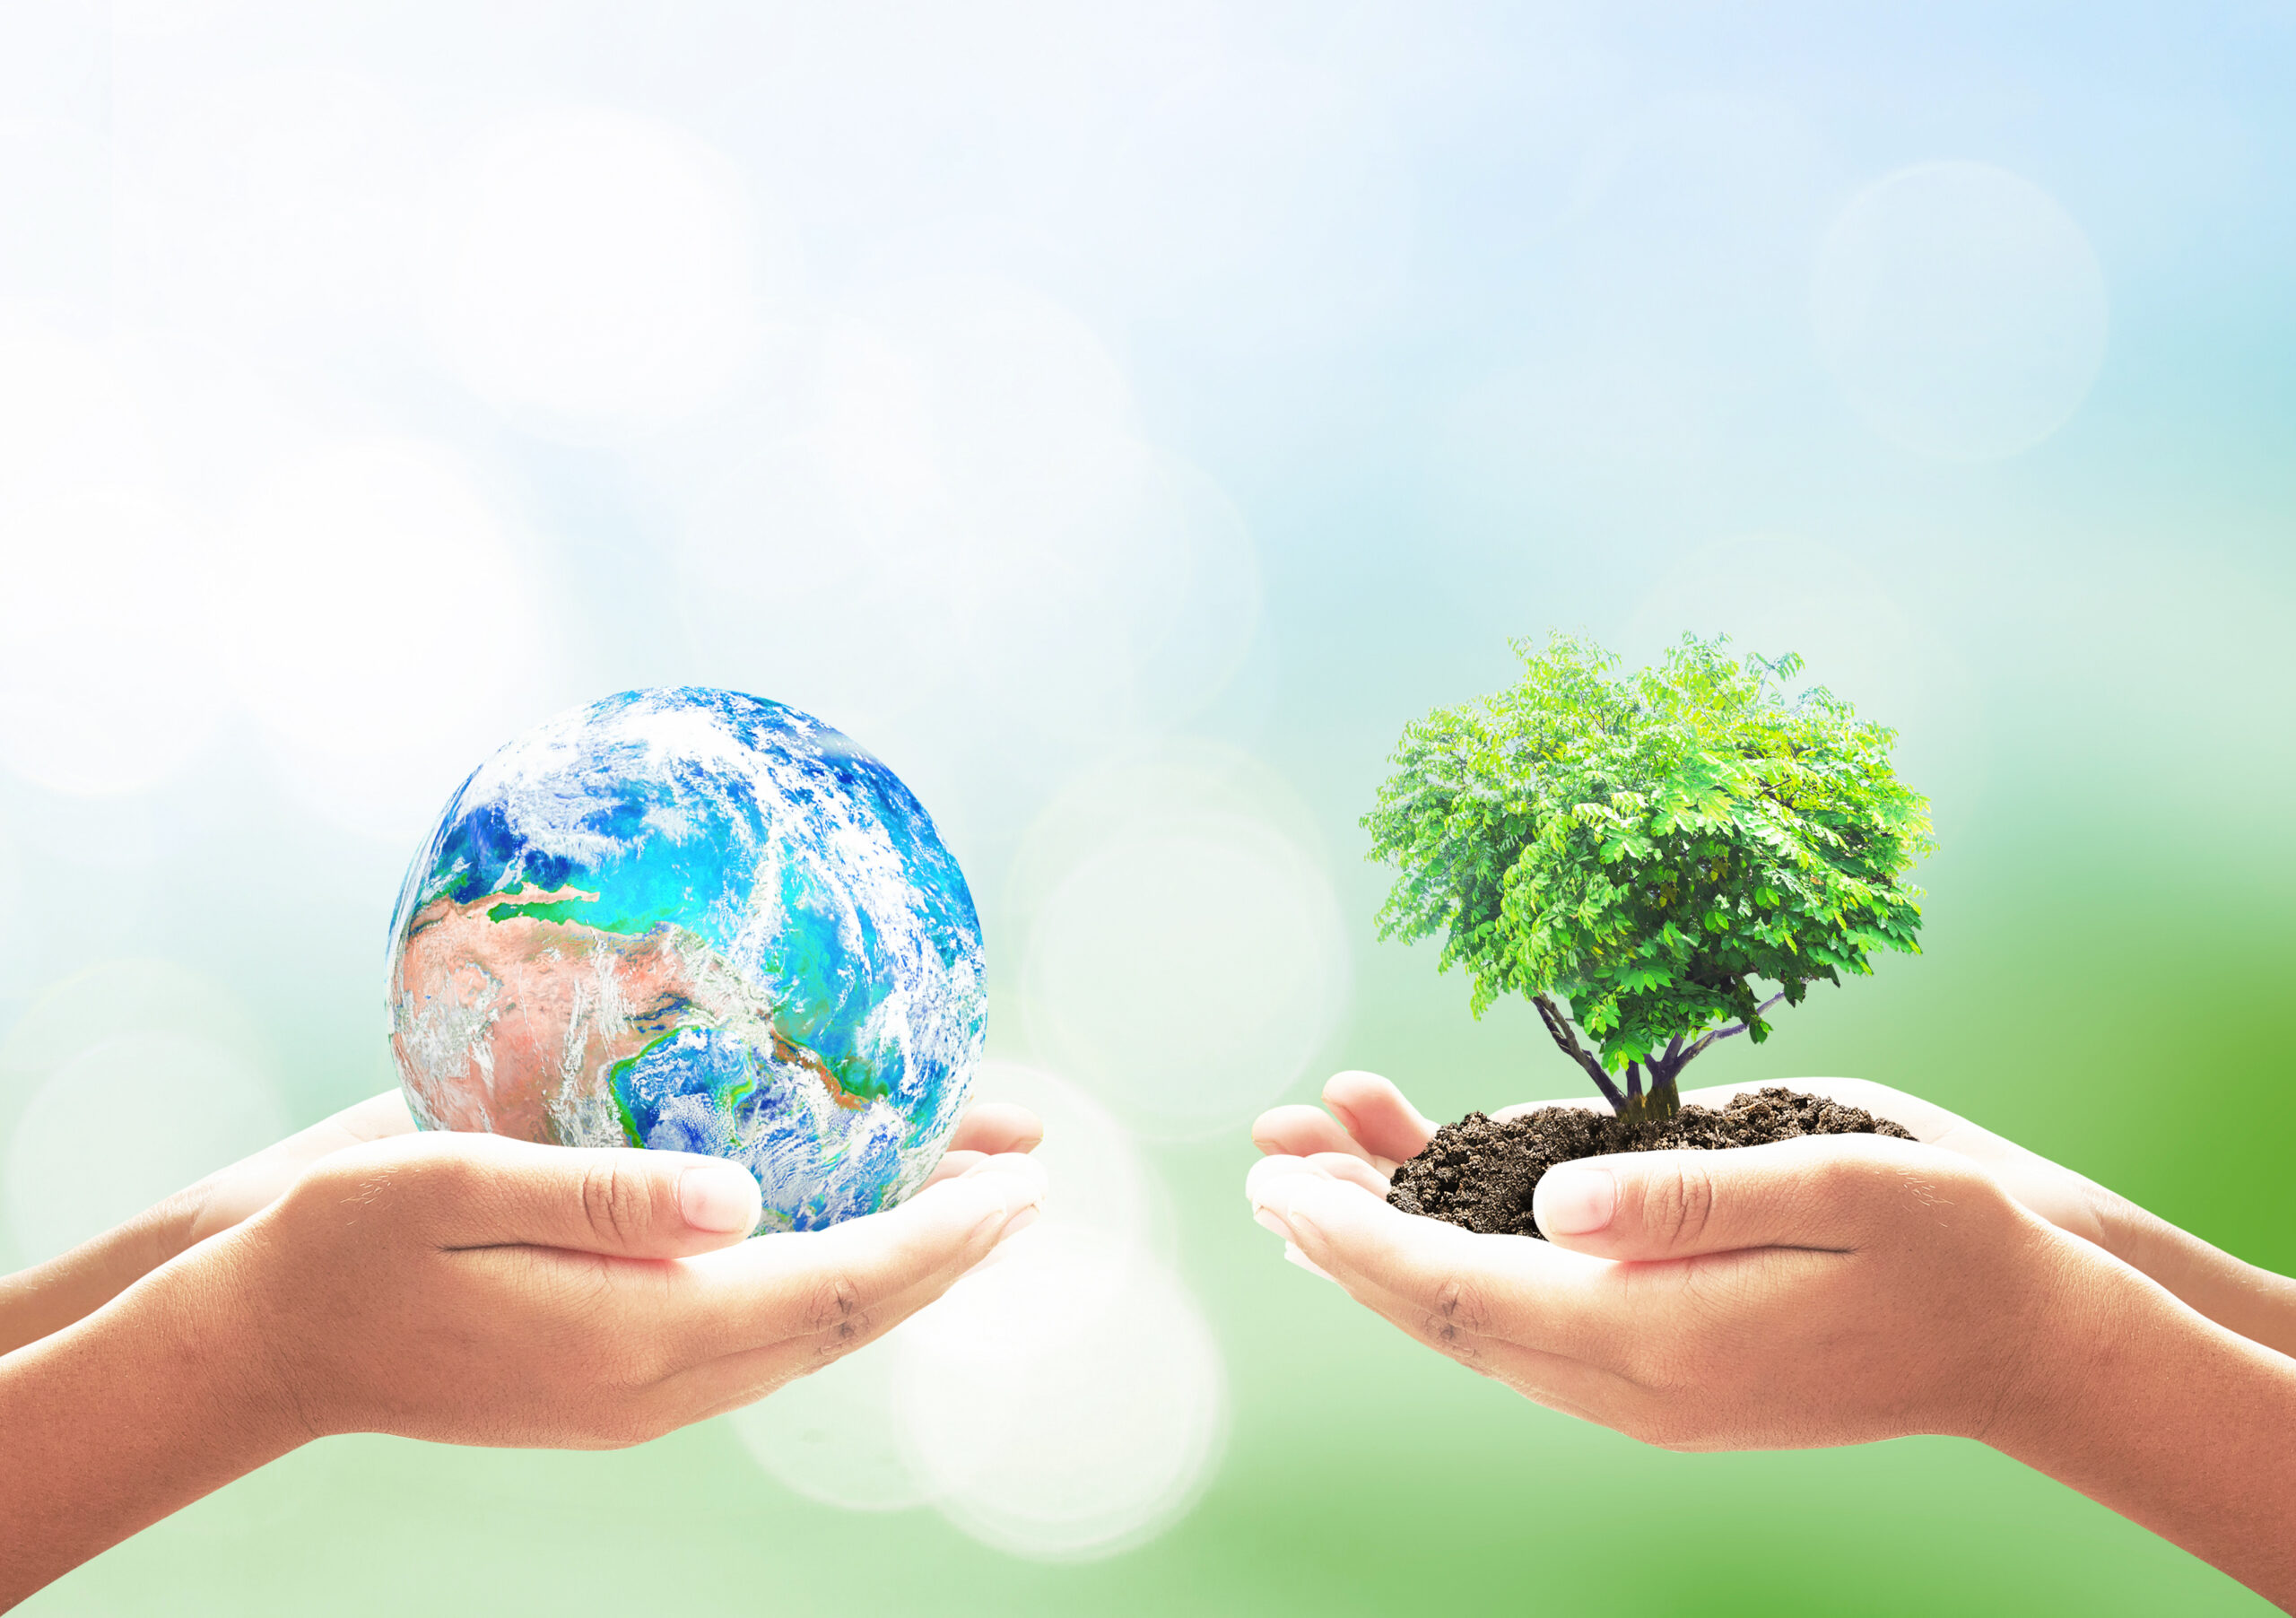 Two pair of hands, one holding the Earth and the second holding a tree